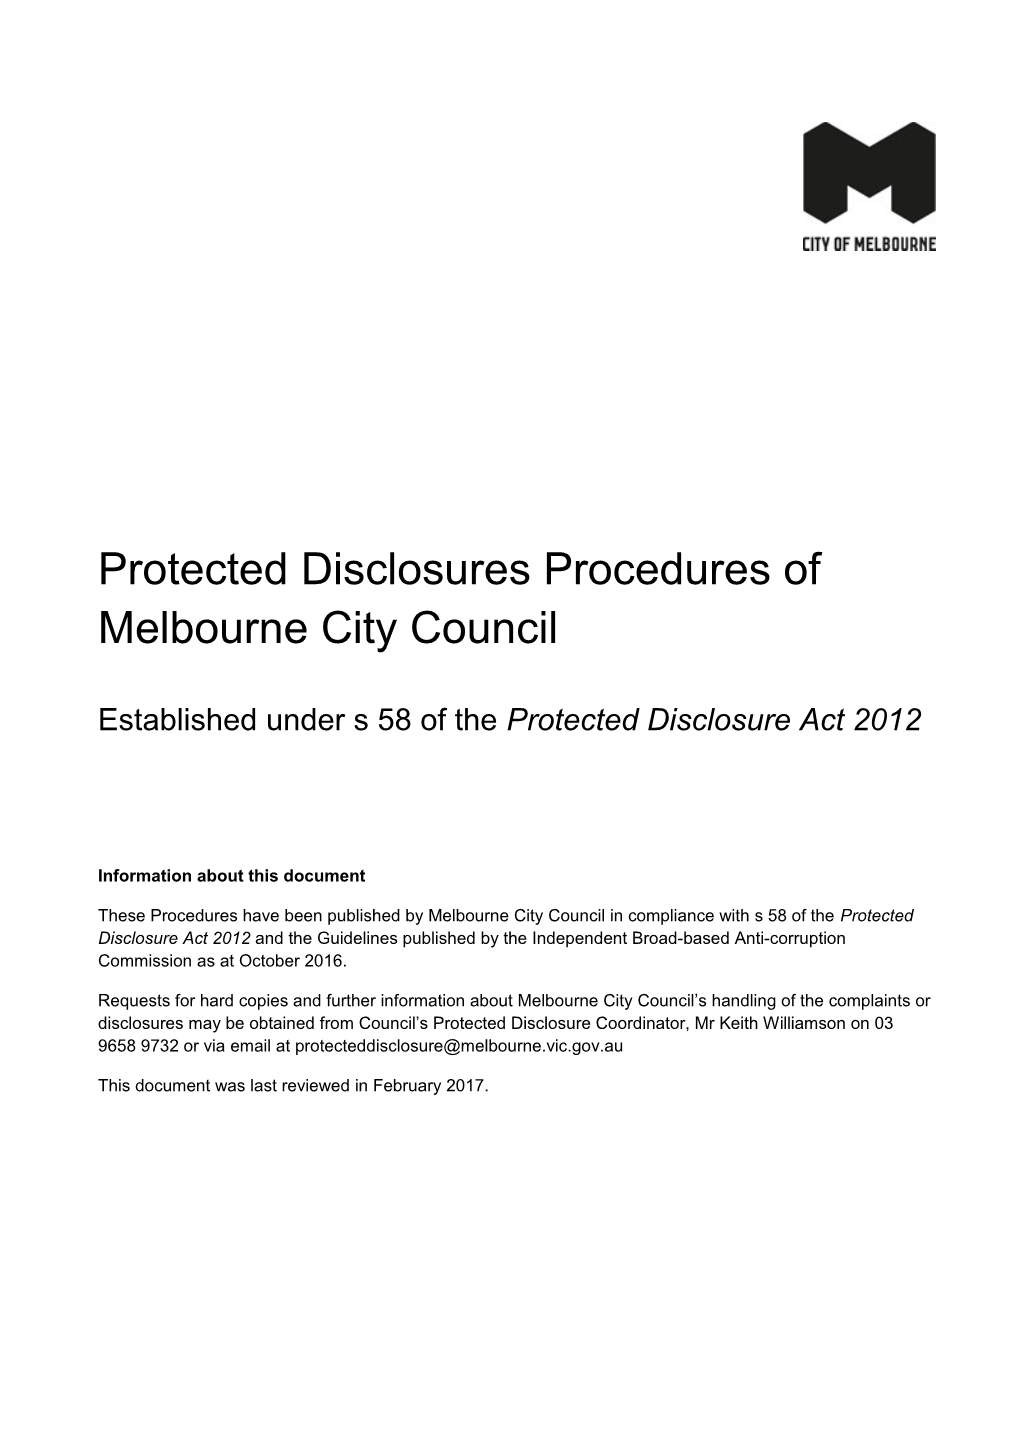 Protected Disclosures Procedures of Melbourne City Council